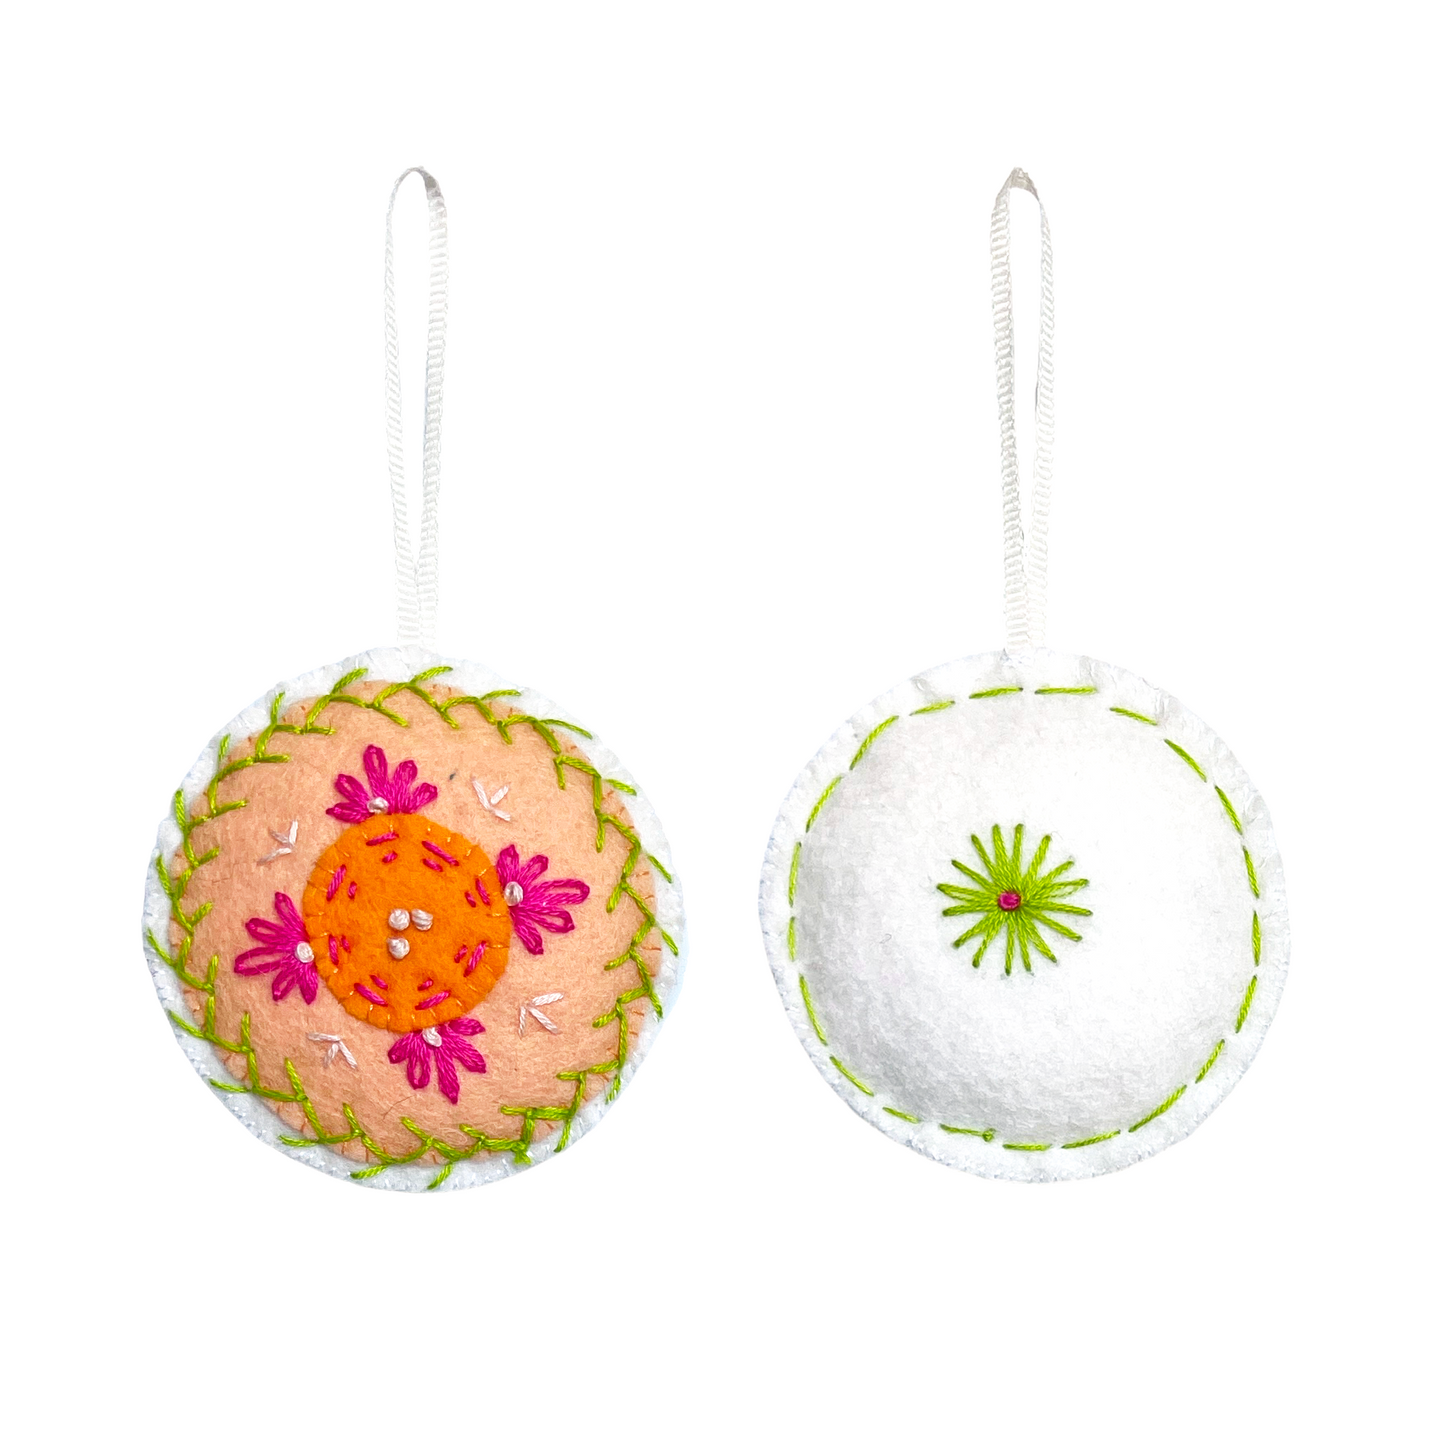 This Mini Mandala ornament features concentric circles of orange, peach, and white felt with a matching white felt back. Both sides are embroidered using lime green, dusty rose, and white threads in a symmetrical, mandala-inspired design.